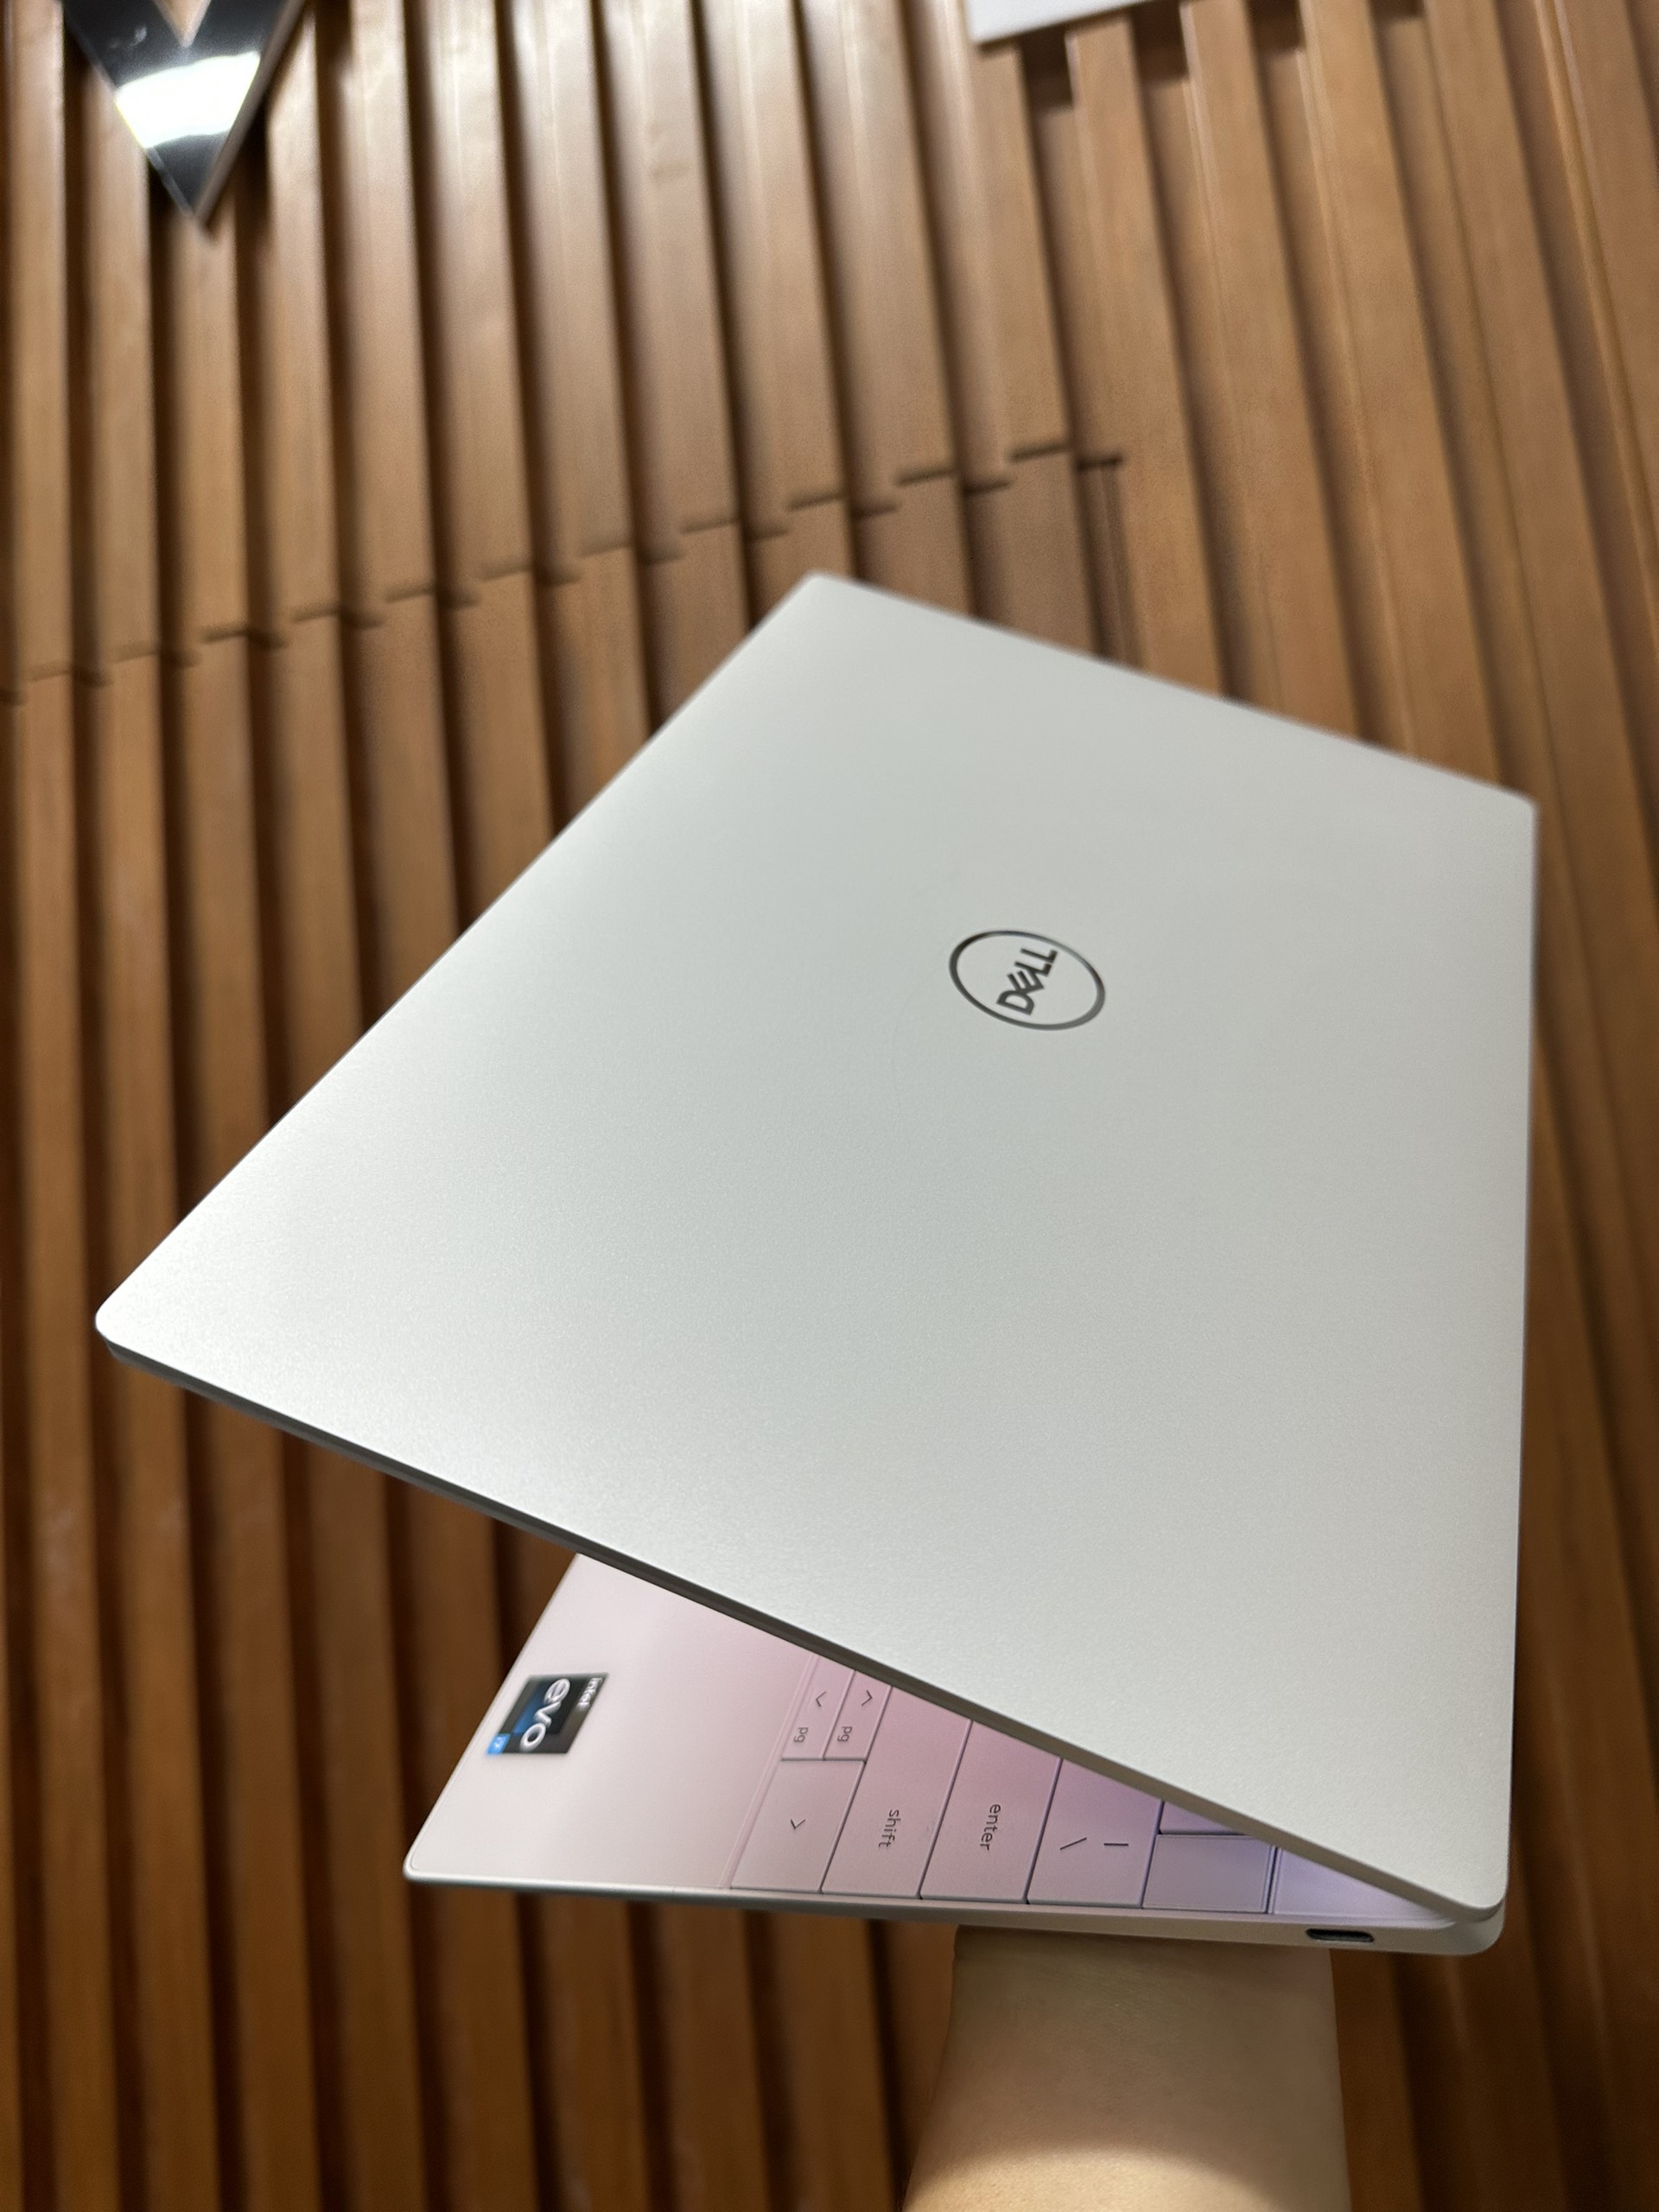 Dell-XPS-13-Plus-9320-Core-i7-m%C3%A0n-3.5K-Oled-anh-7.jpg